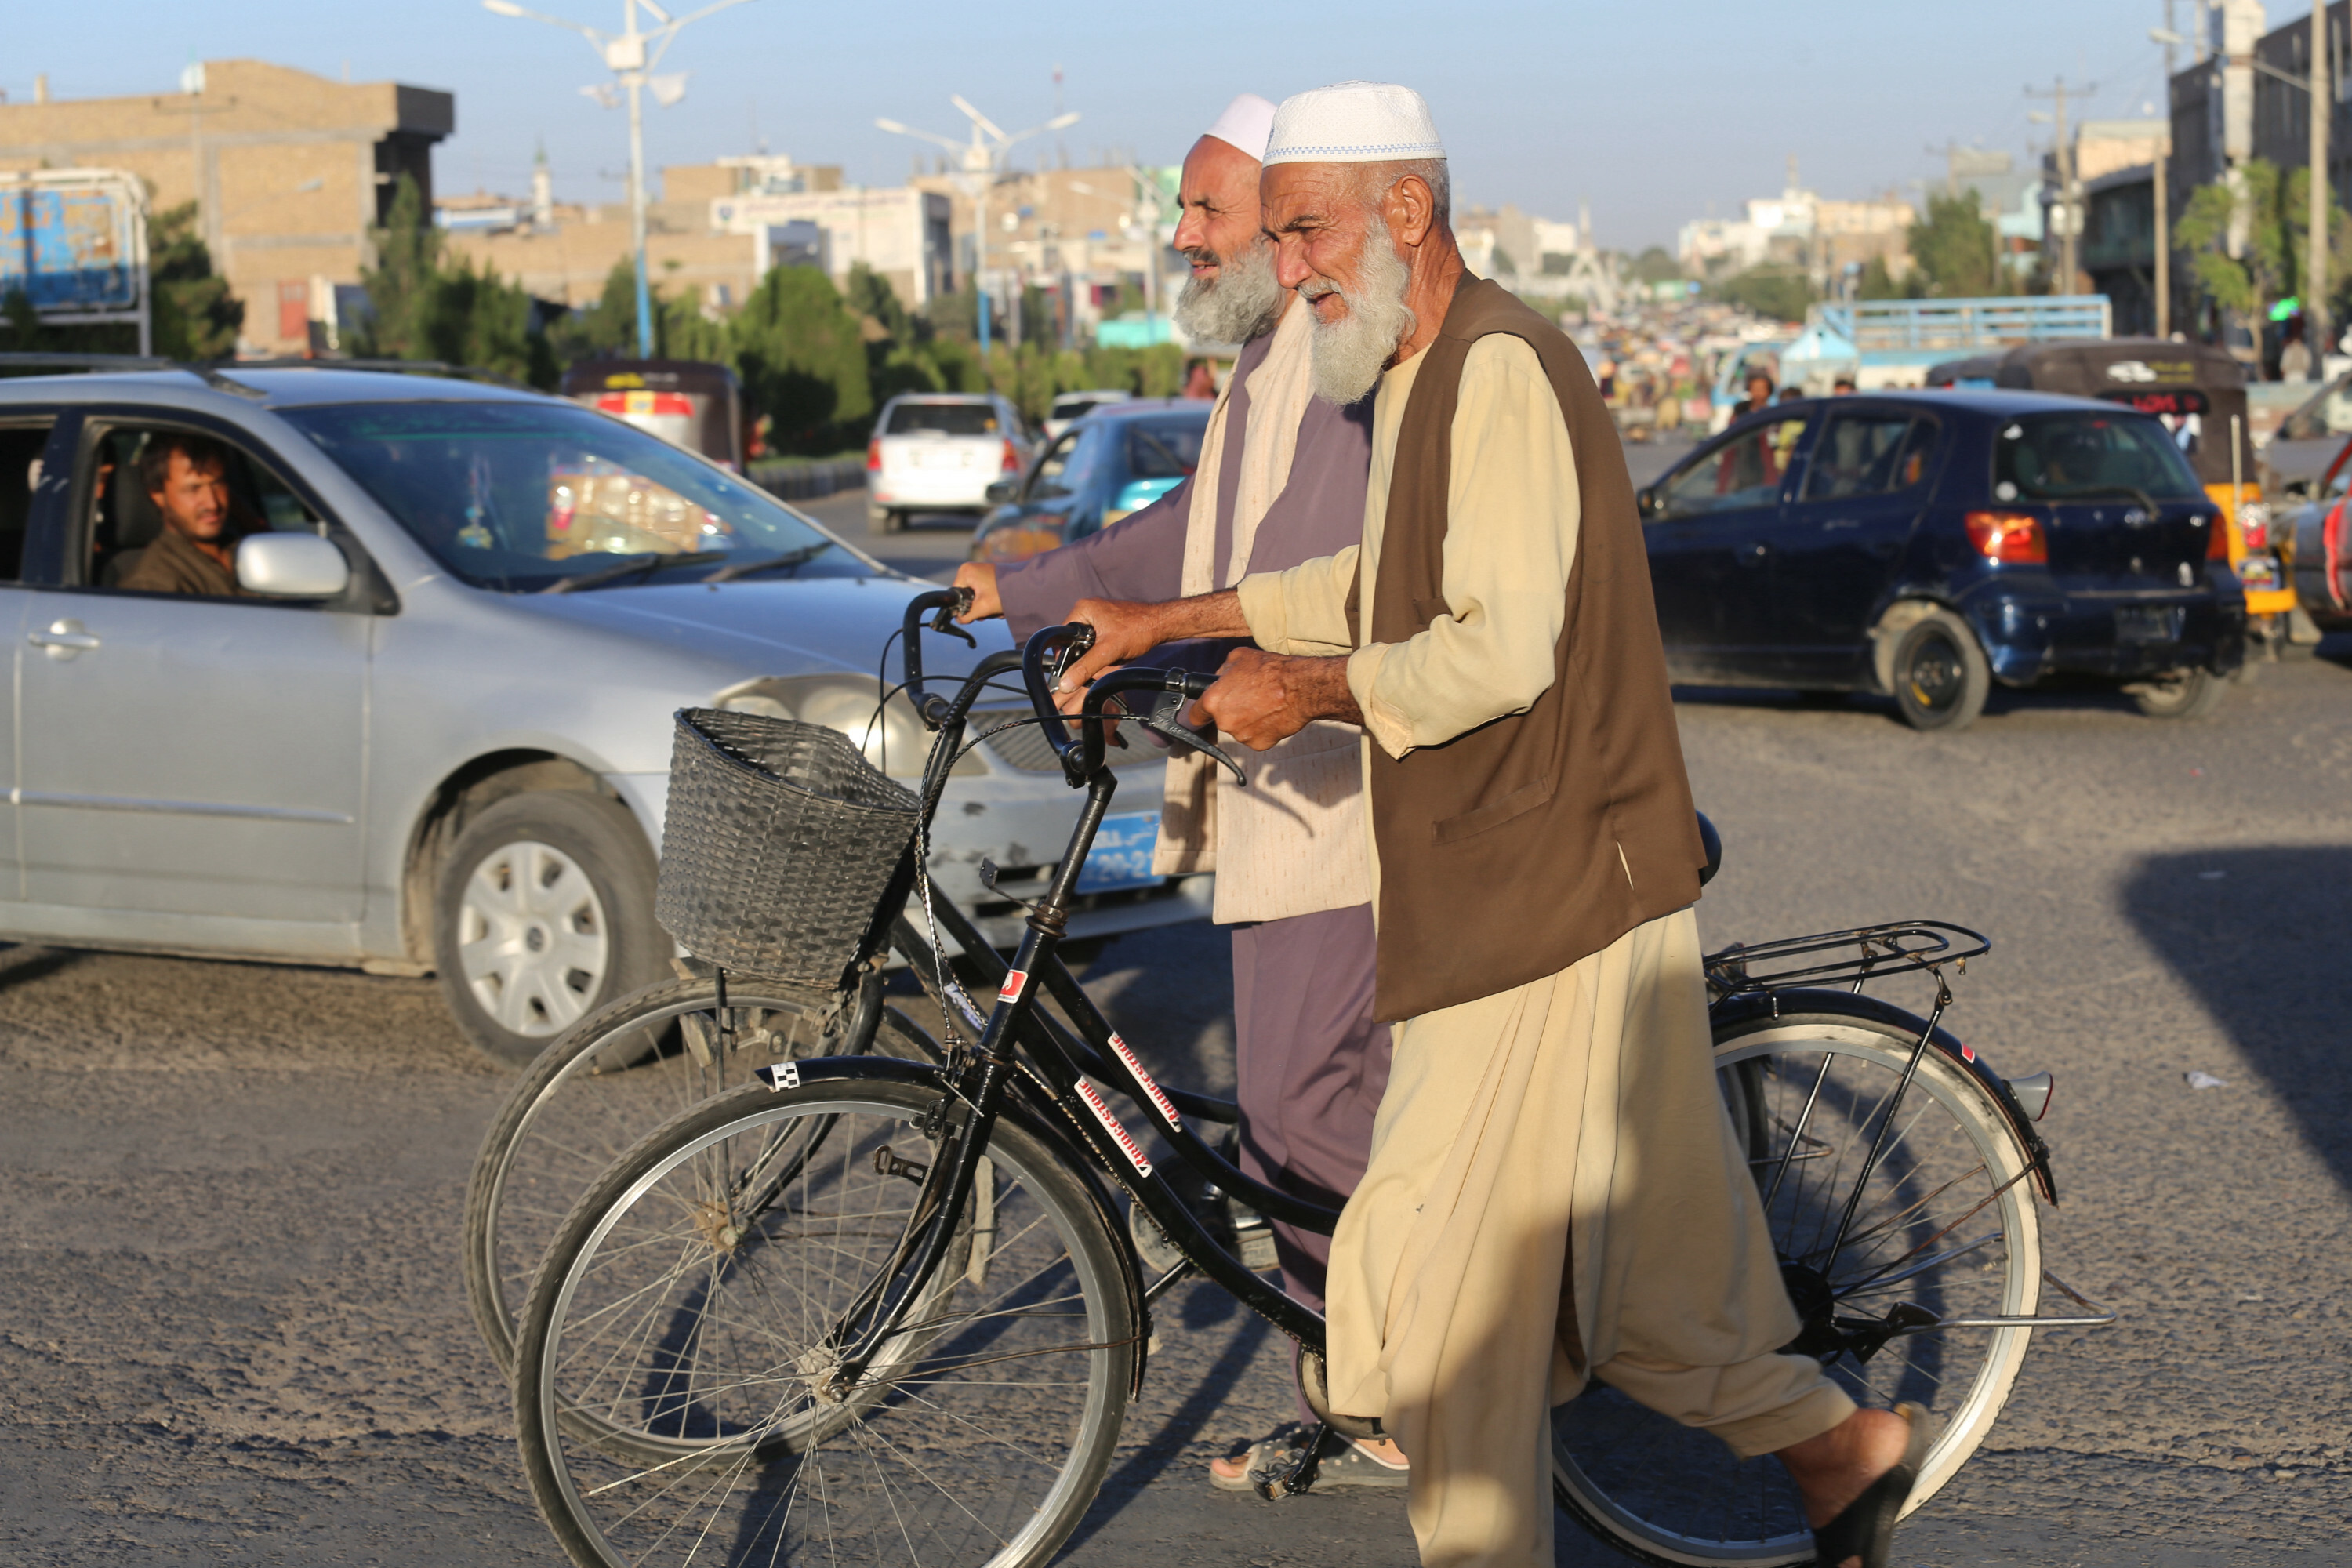 Daily life continues in Herat after Taliban takeover